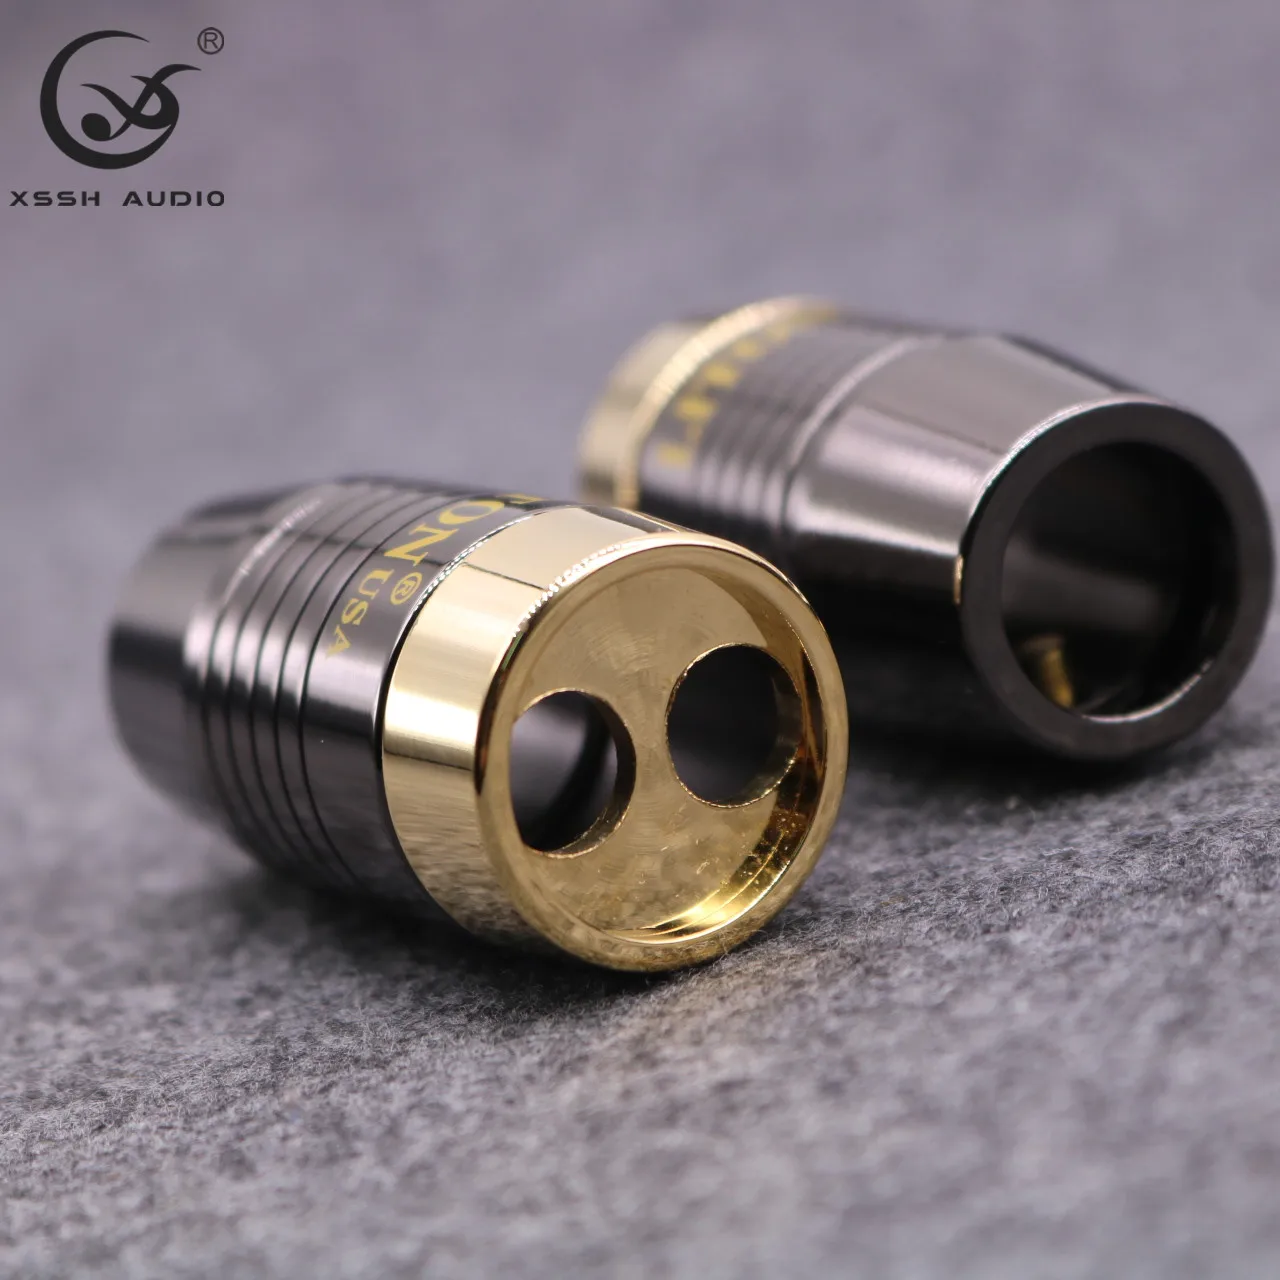 

YIVIO XSSH Hifi LITON DIY HIFI System Solid Steel Speaker Video Audio Cable Wire Pants Boots coaxial y splitter, As pcitures